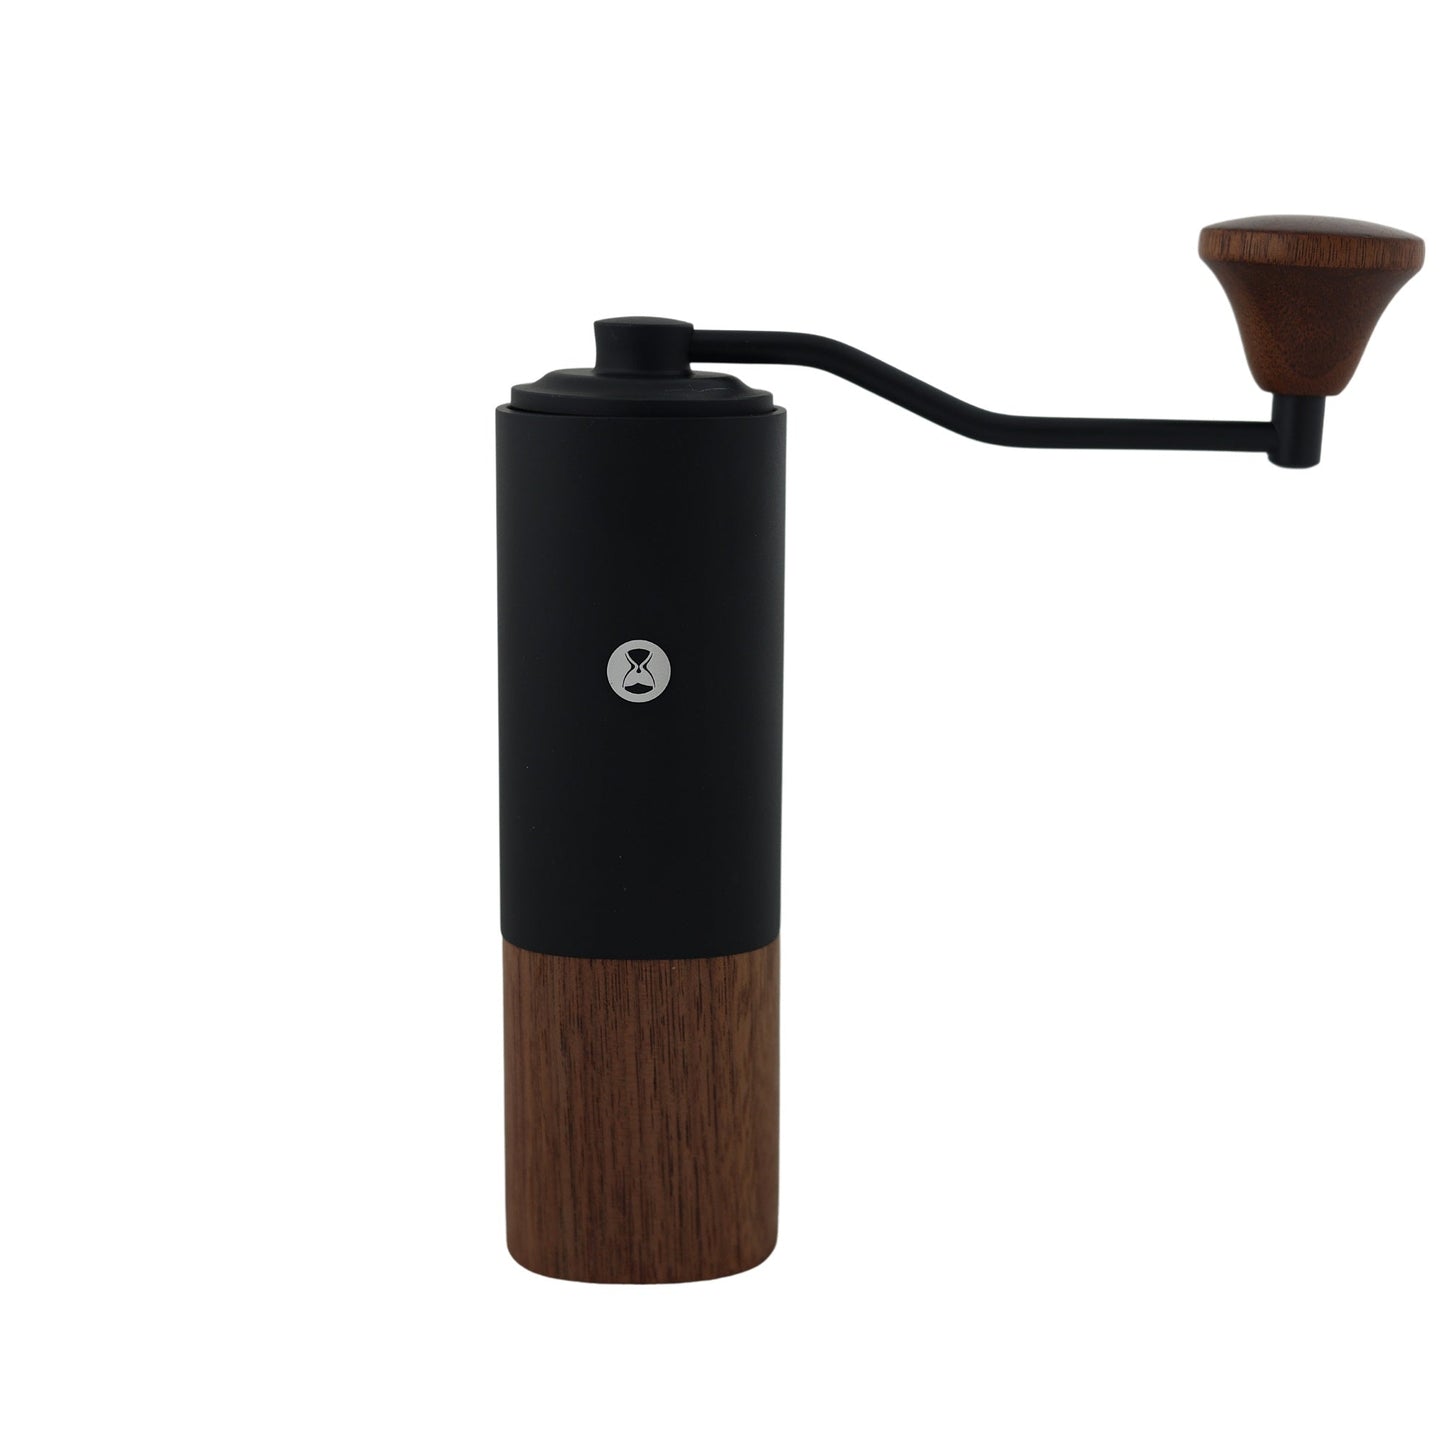 Load image into Gallery viewer, Timemore Chestnut G3 - Manual Coffee Grinder - Velo Coffee Roasters
